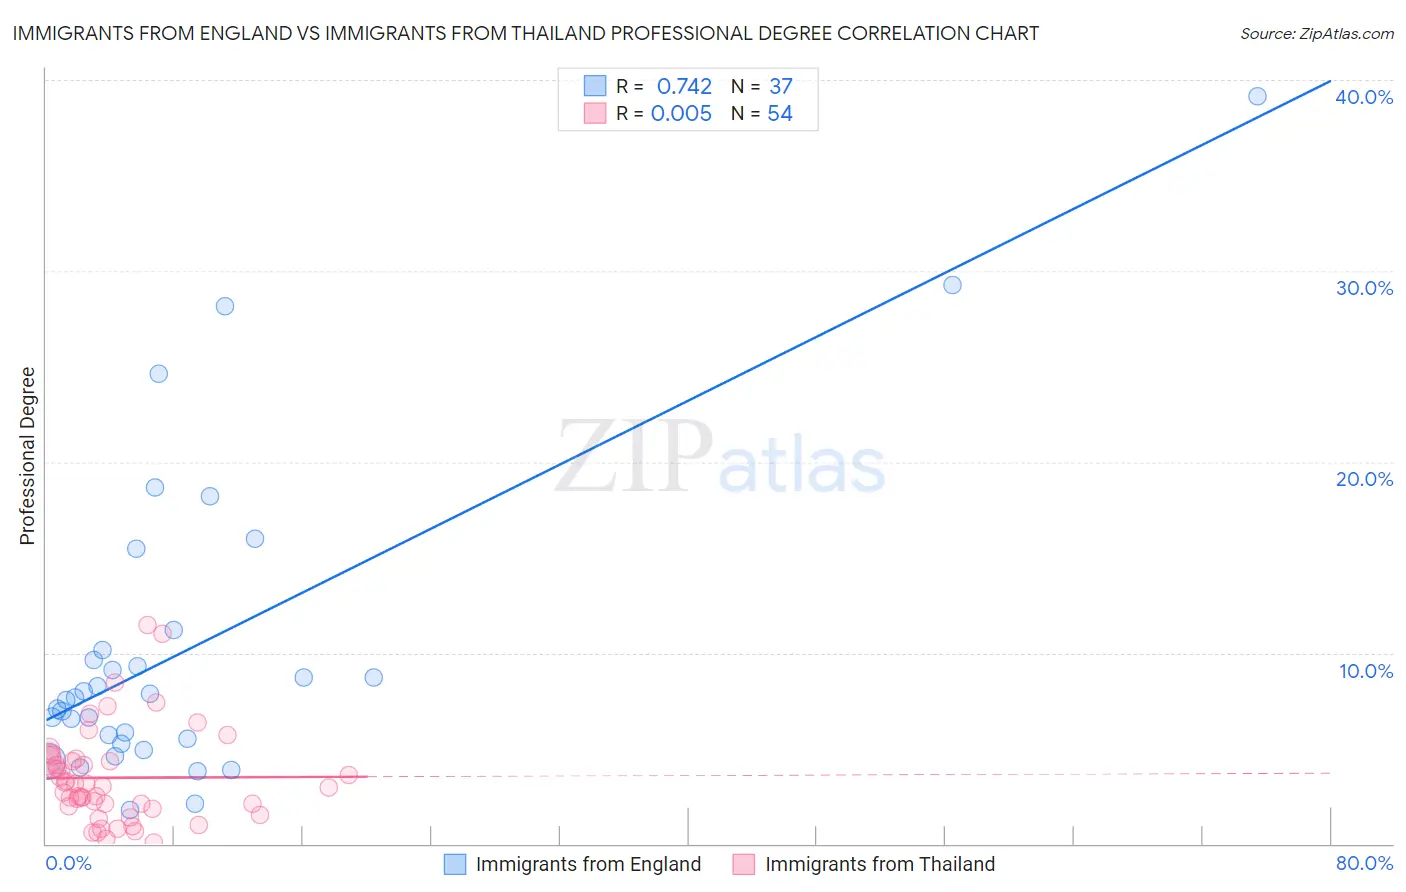 Immigrants from England vs Immigrants from Thailand Professional Degree